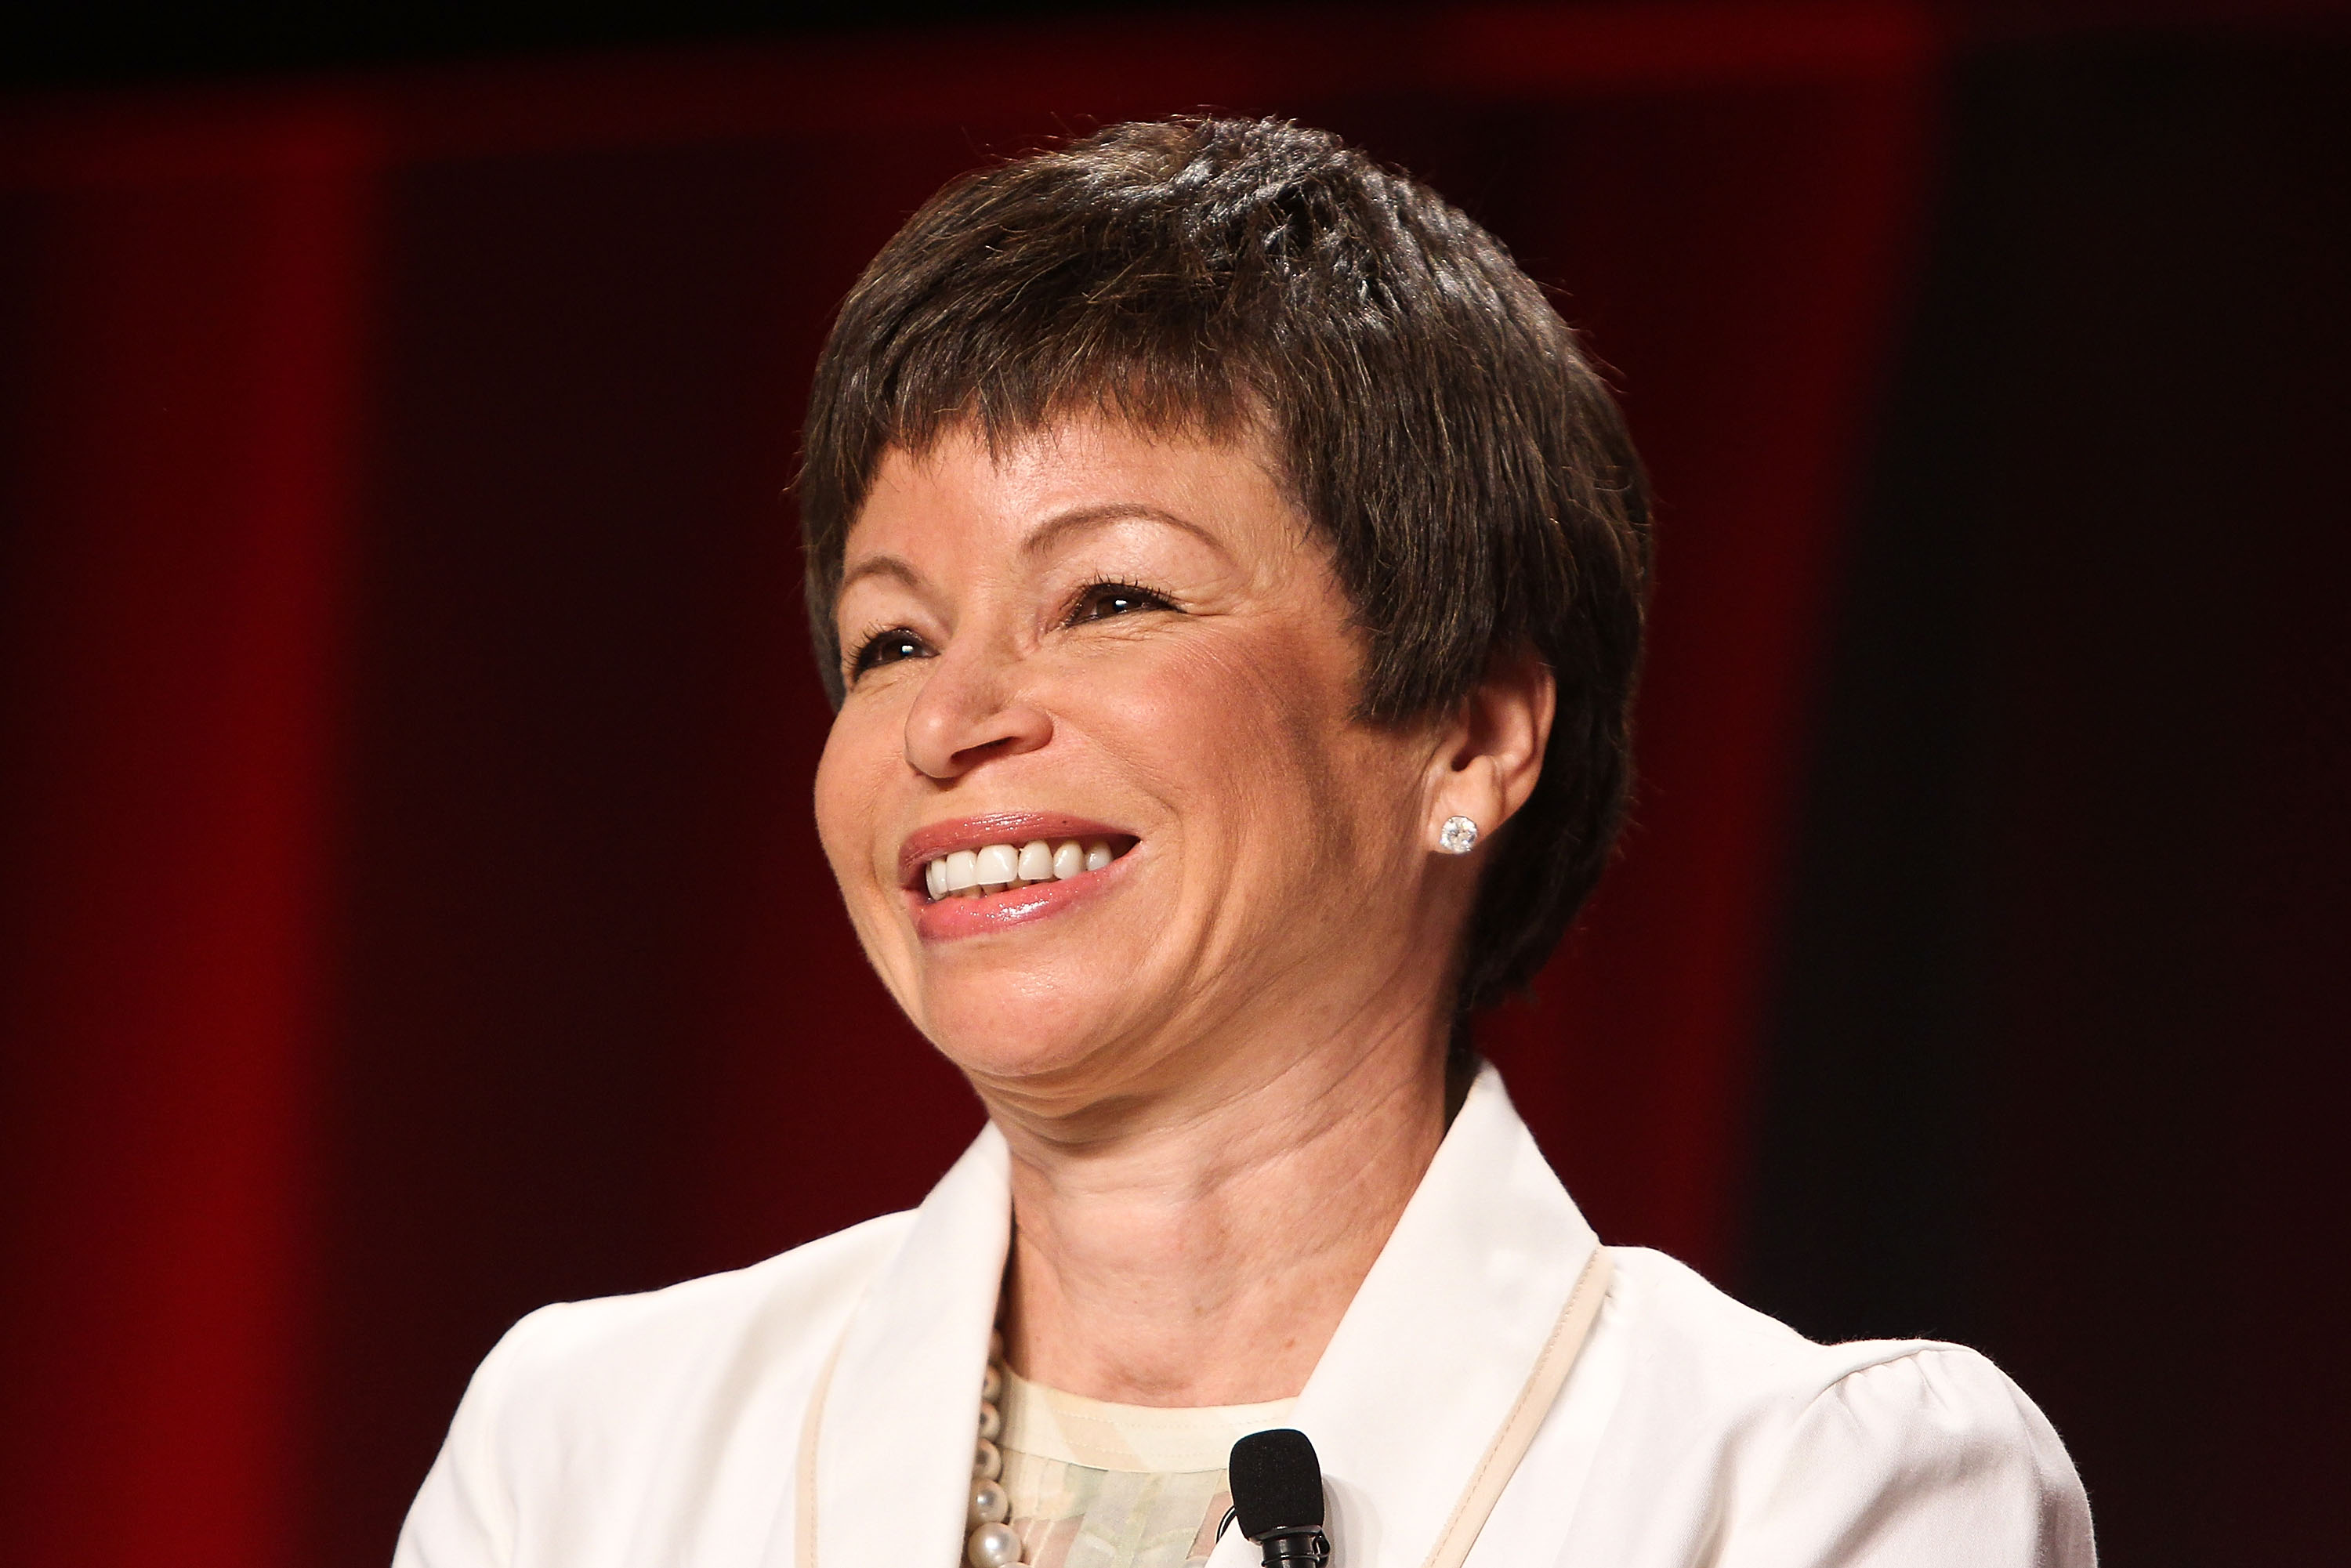 White House senior adviser Valerie Jarrett participates in a panel discussion during the 2012 Federal Partners Bullying Prevention summit at the Marriott Wardman Park Hotel on August 7, 2012 in Washington, DC. (Paul Morigi—WireImage/Getty Images)